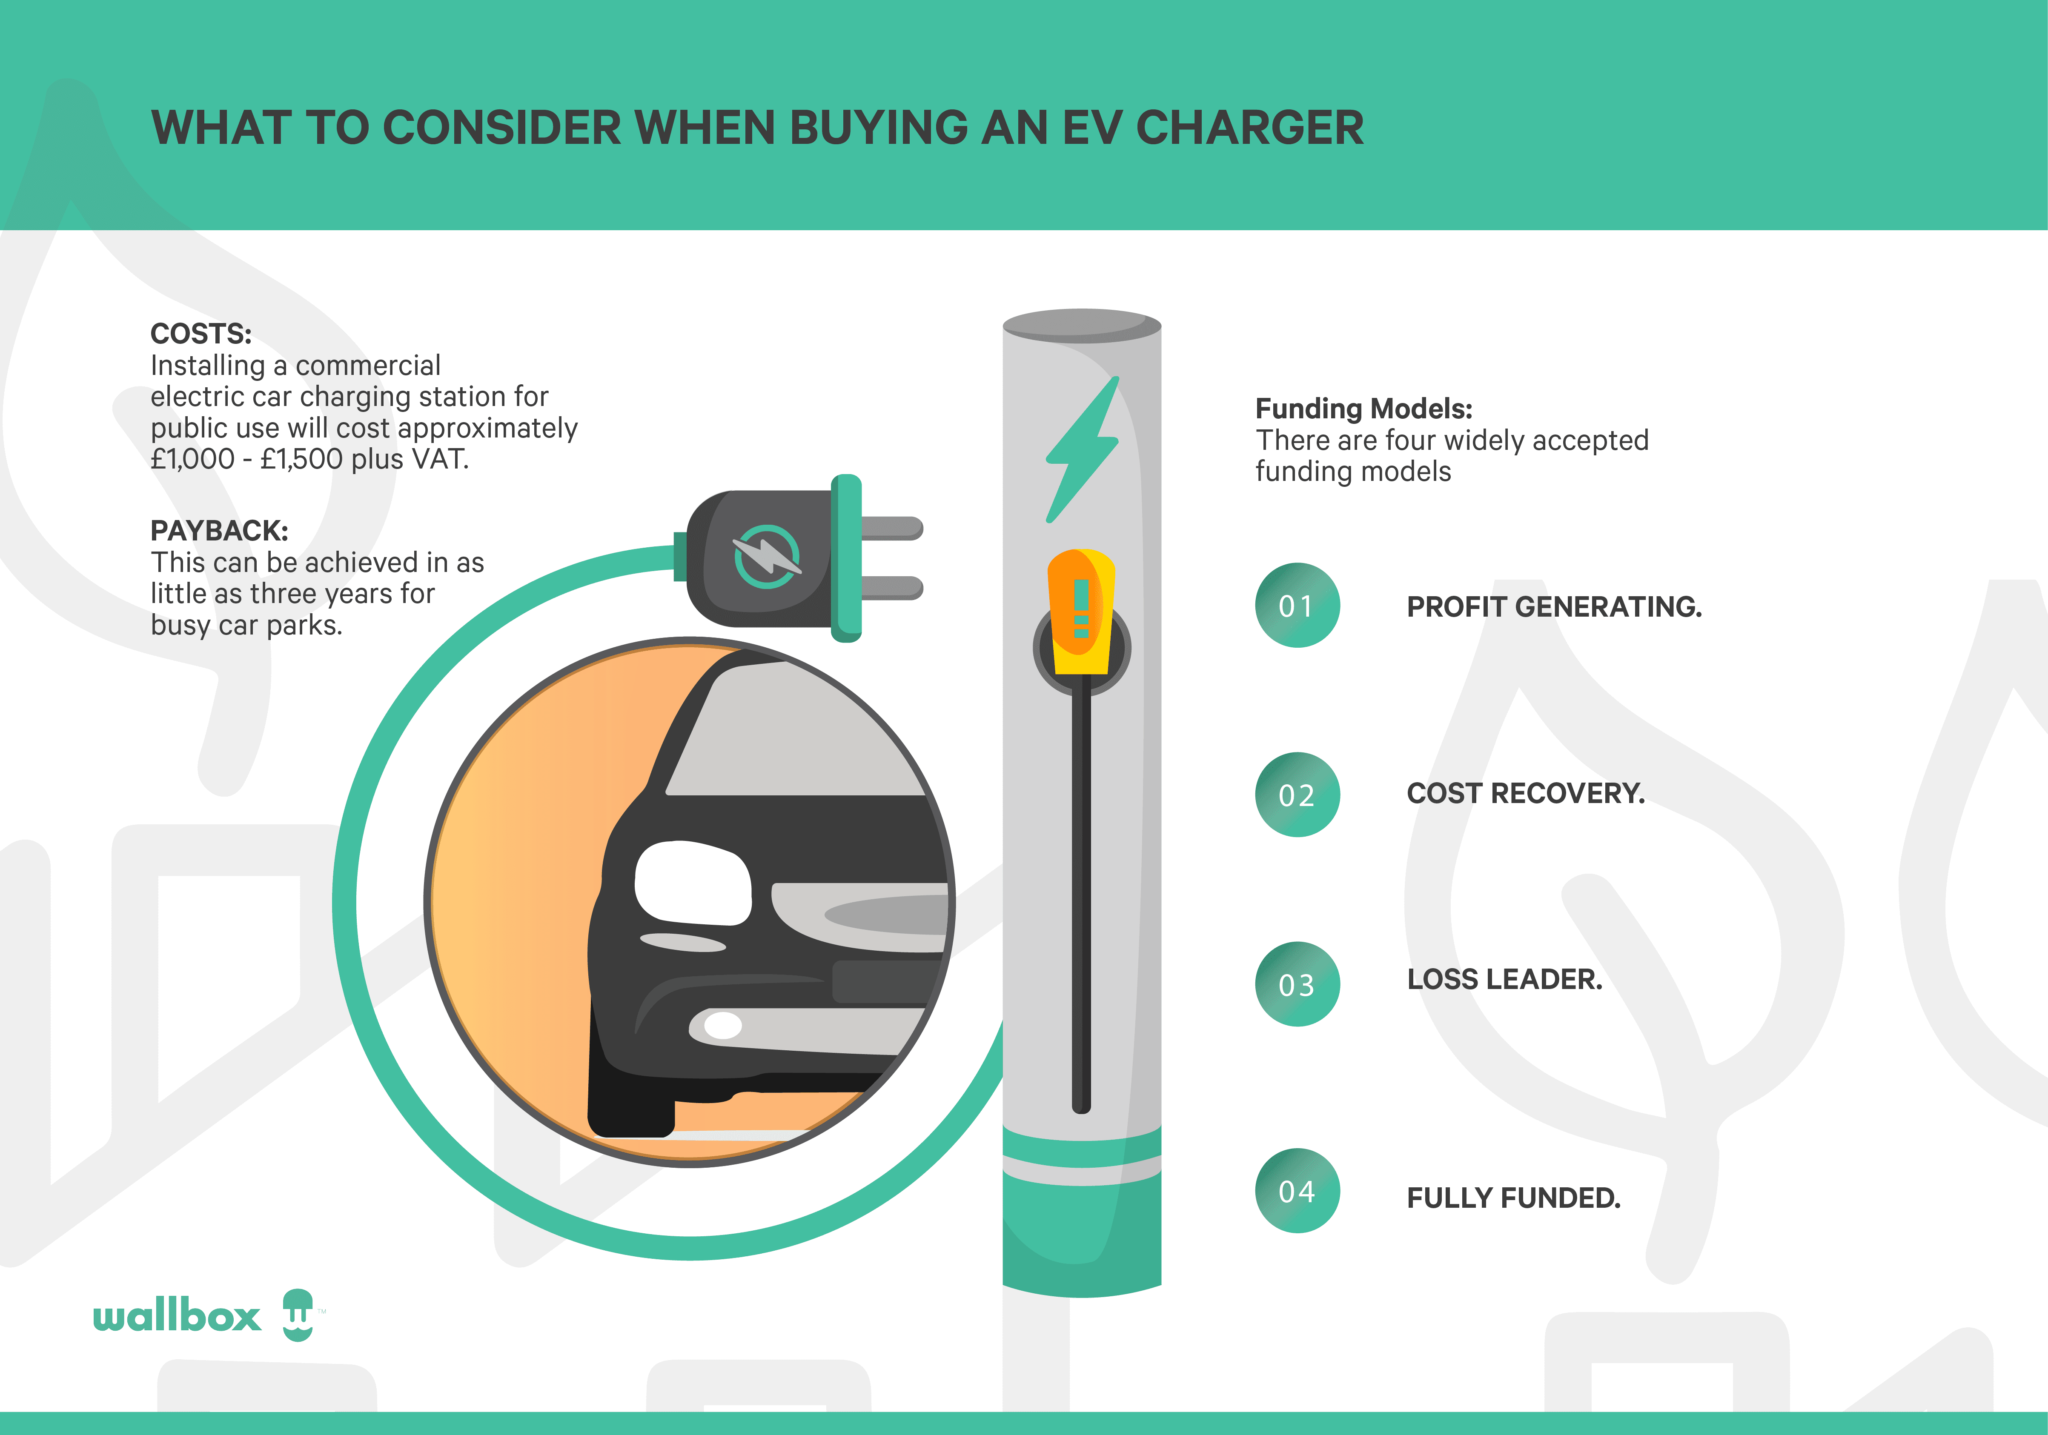 Electric Car Charging Stations Costs, Payback and Funding Models